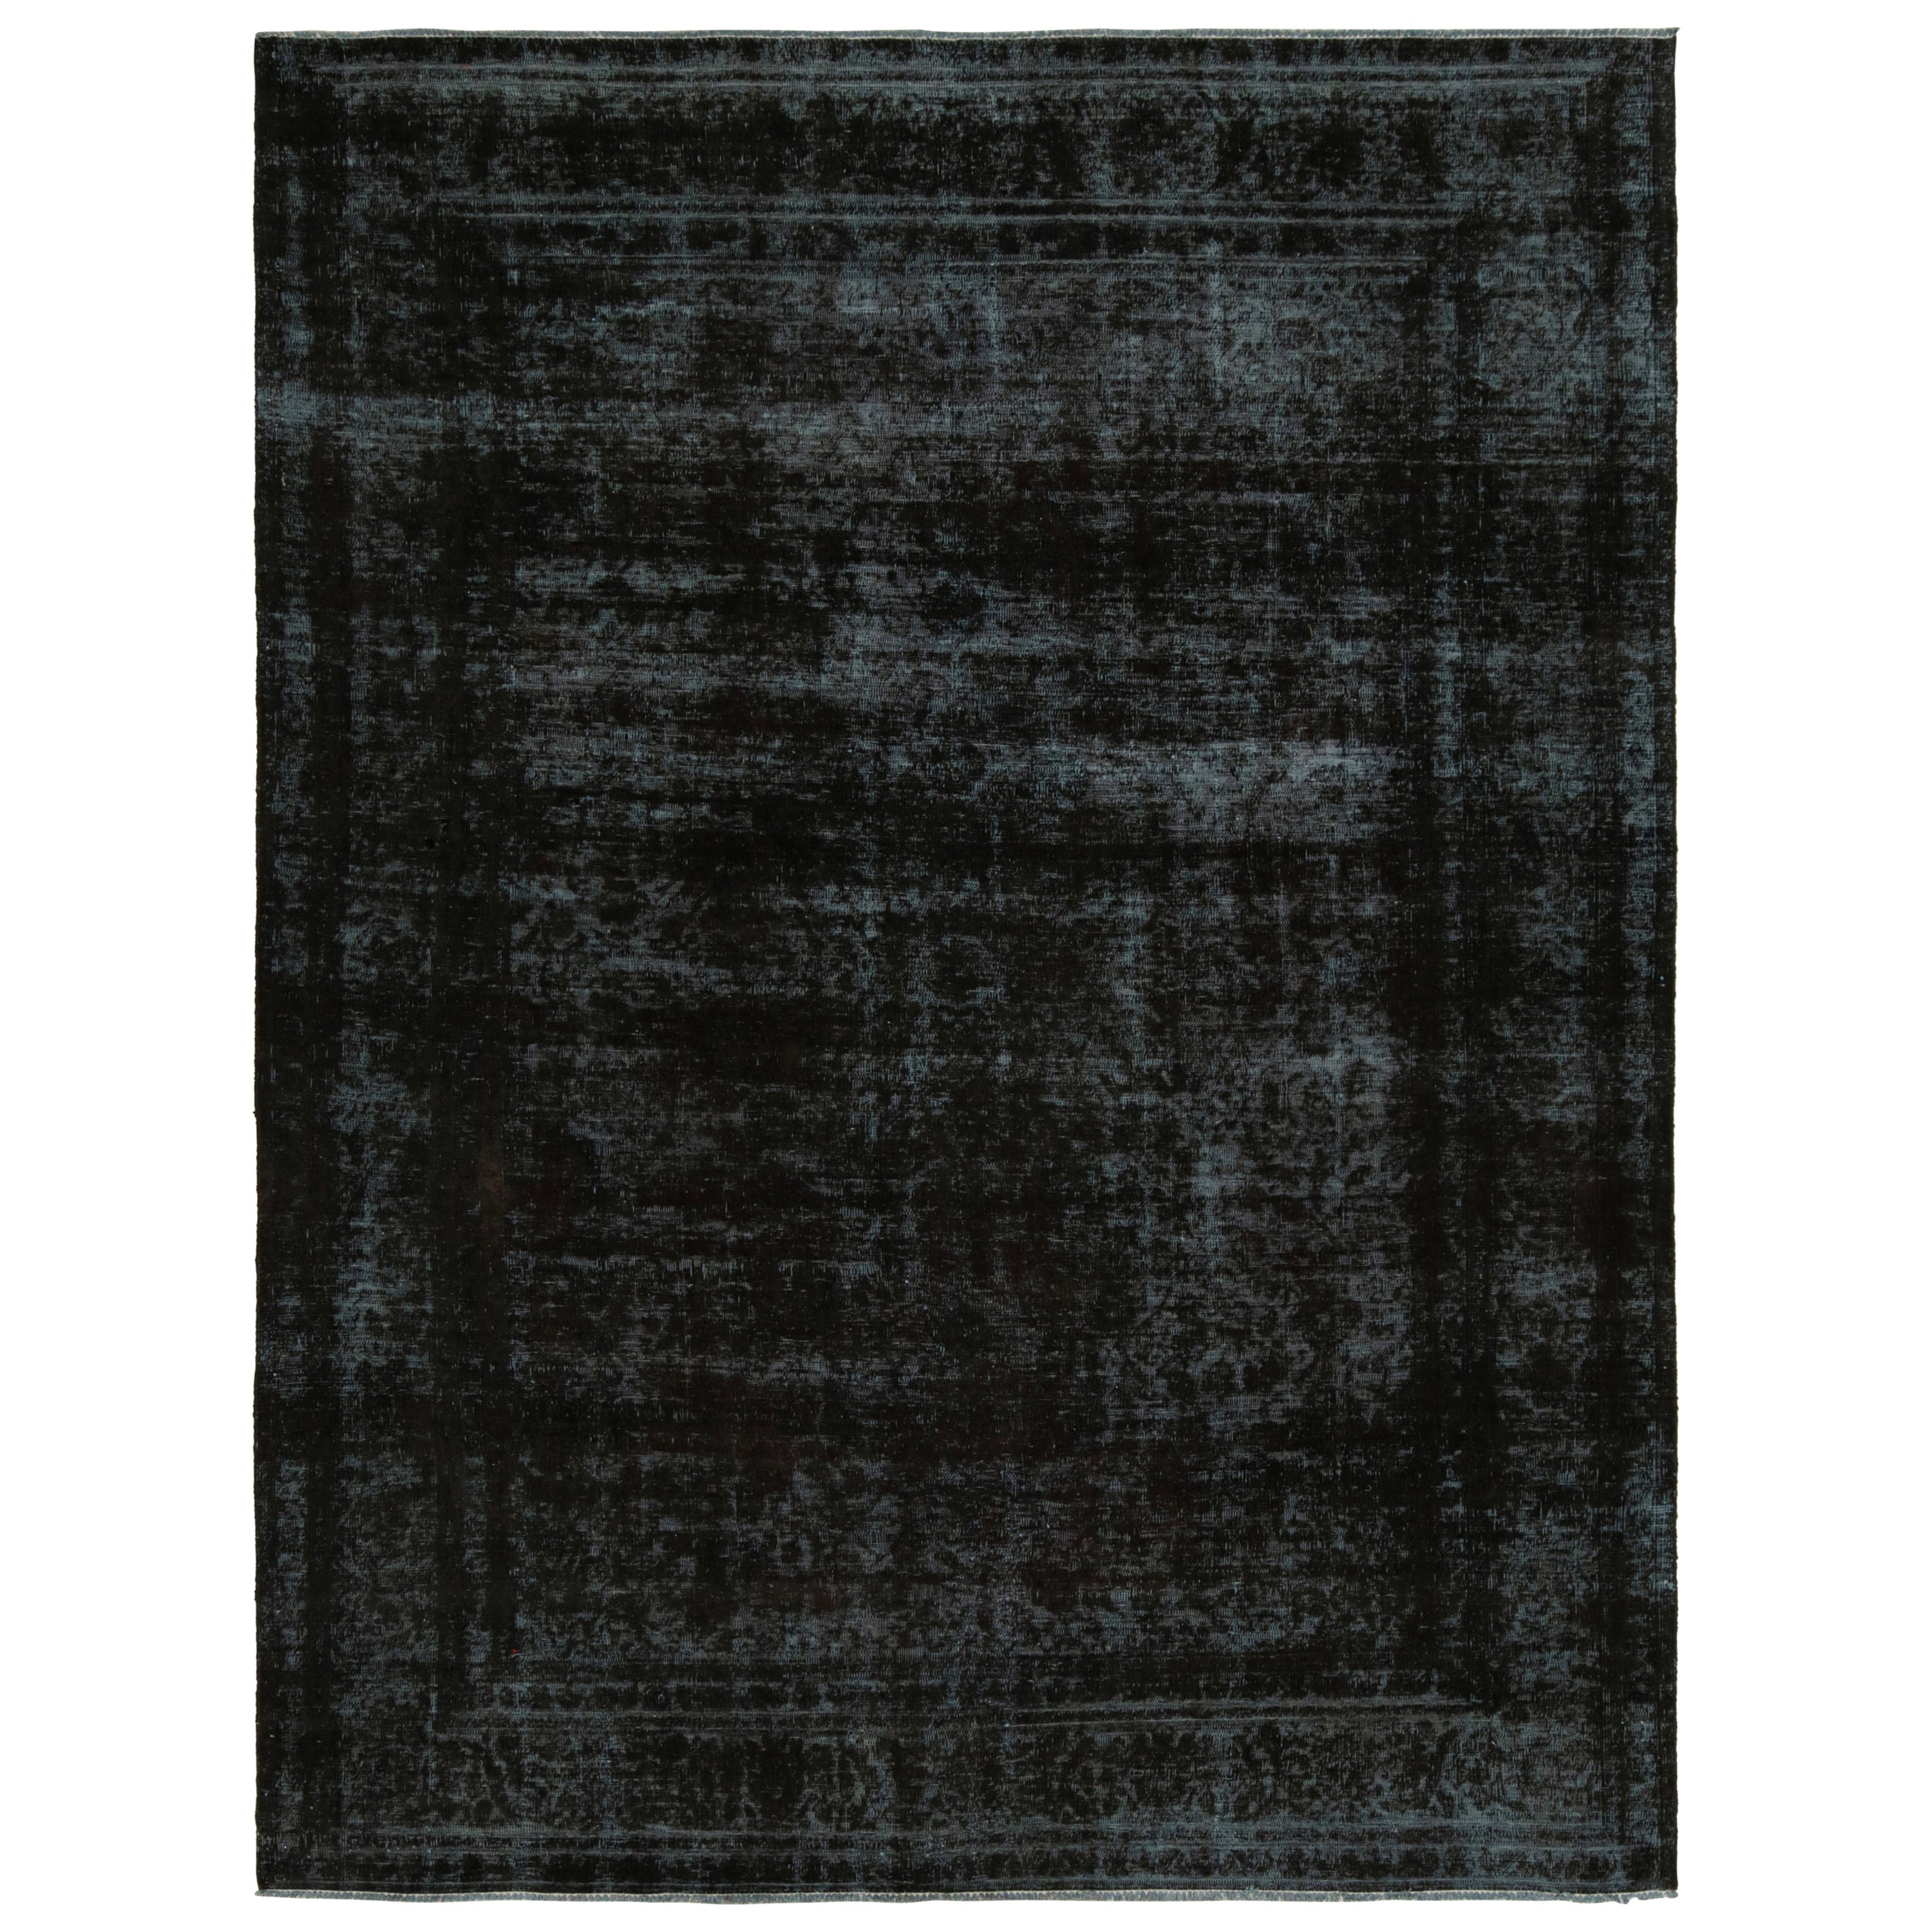 Vintage Persian Rug in Black and Ice Blue Tones, From Rug & Kilim